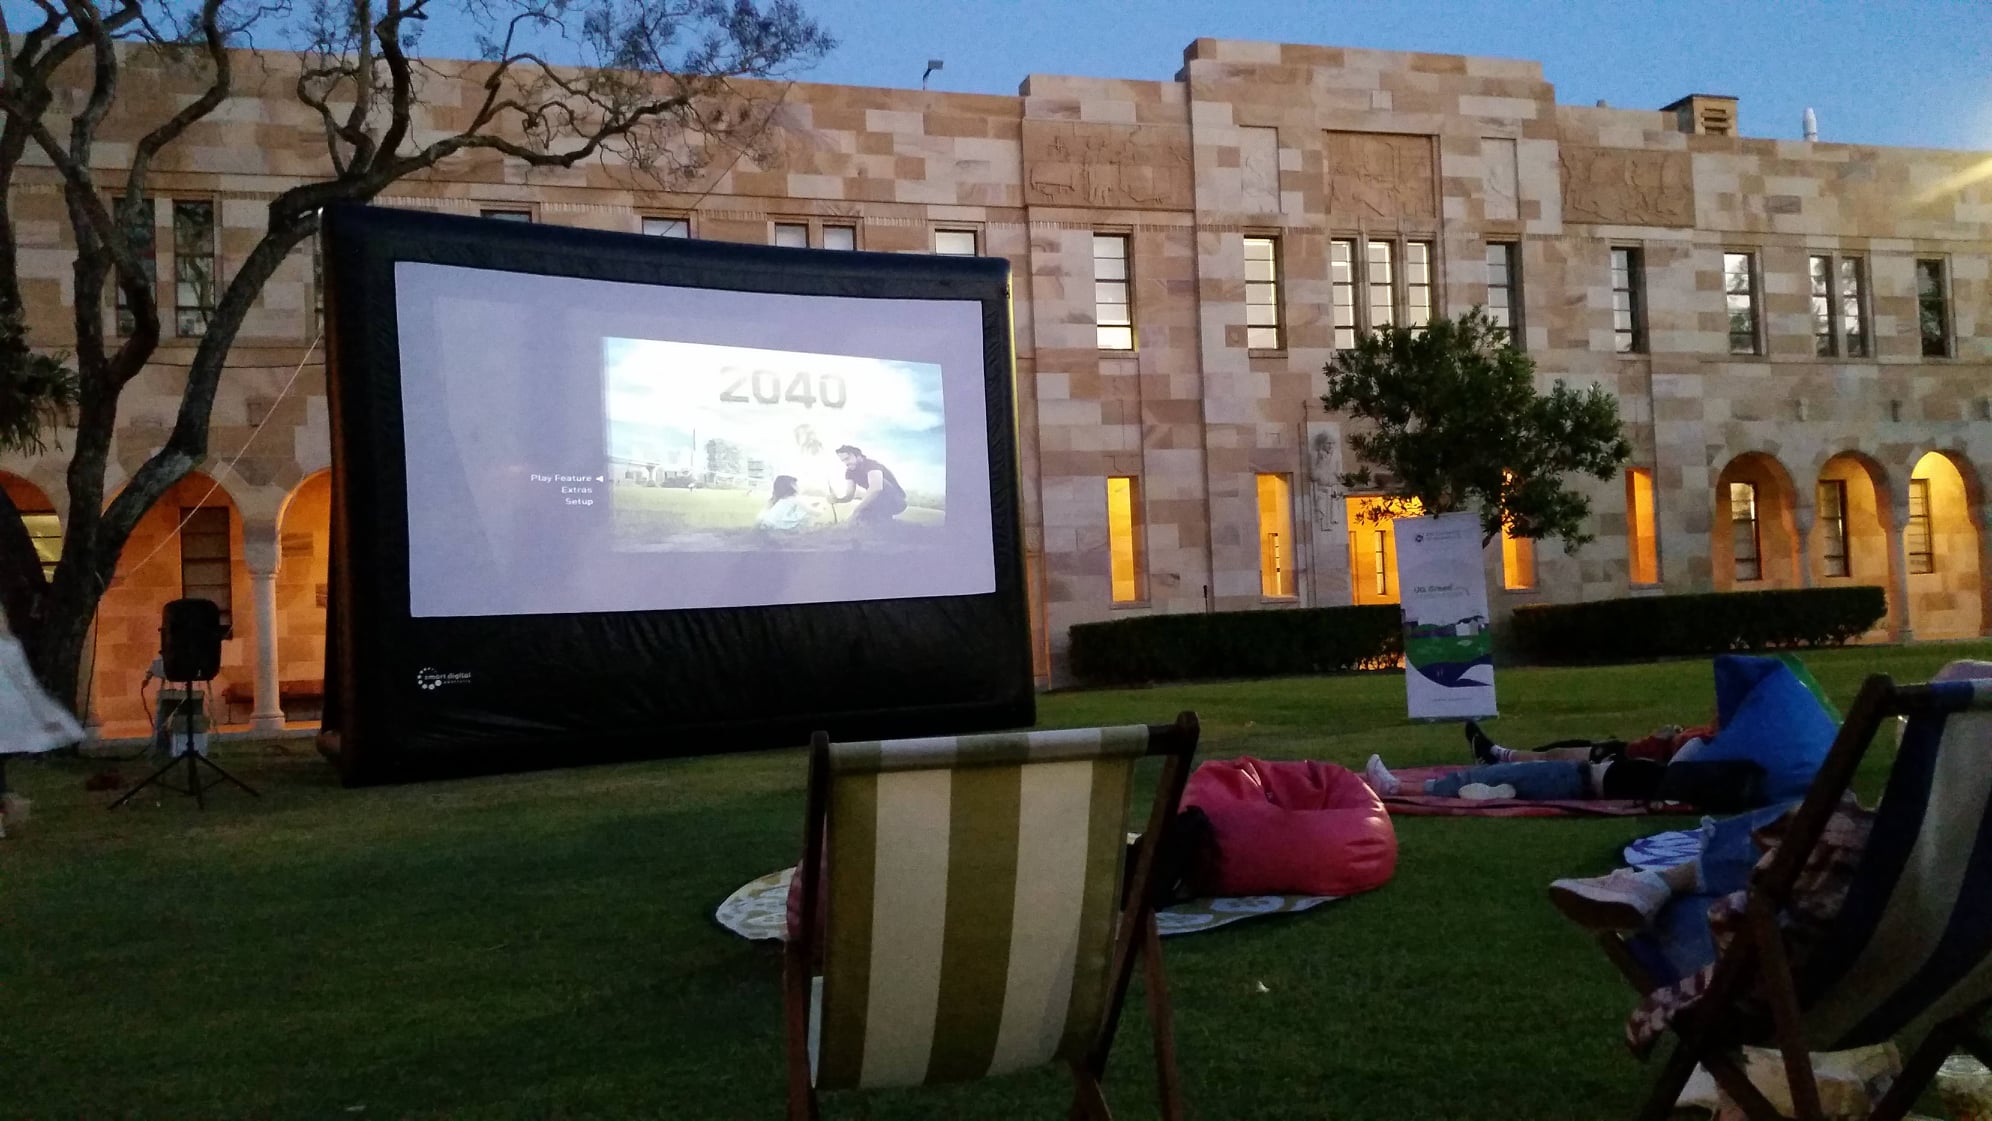 GAP’s 2040 movie night, in collaboration with UQ Life